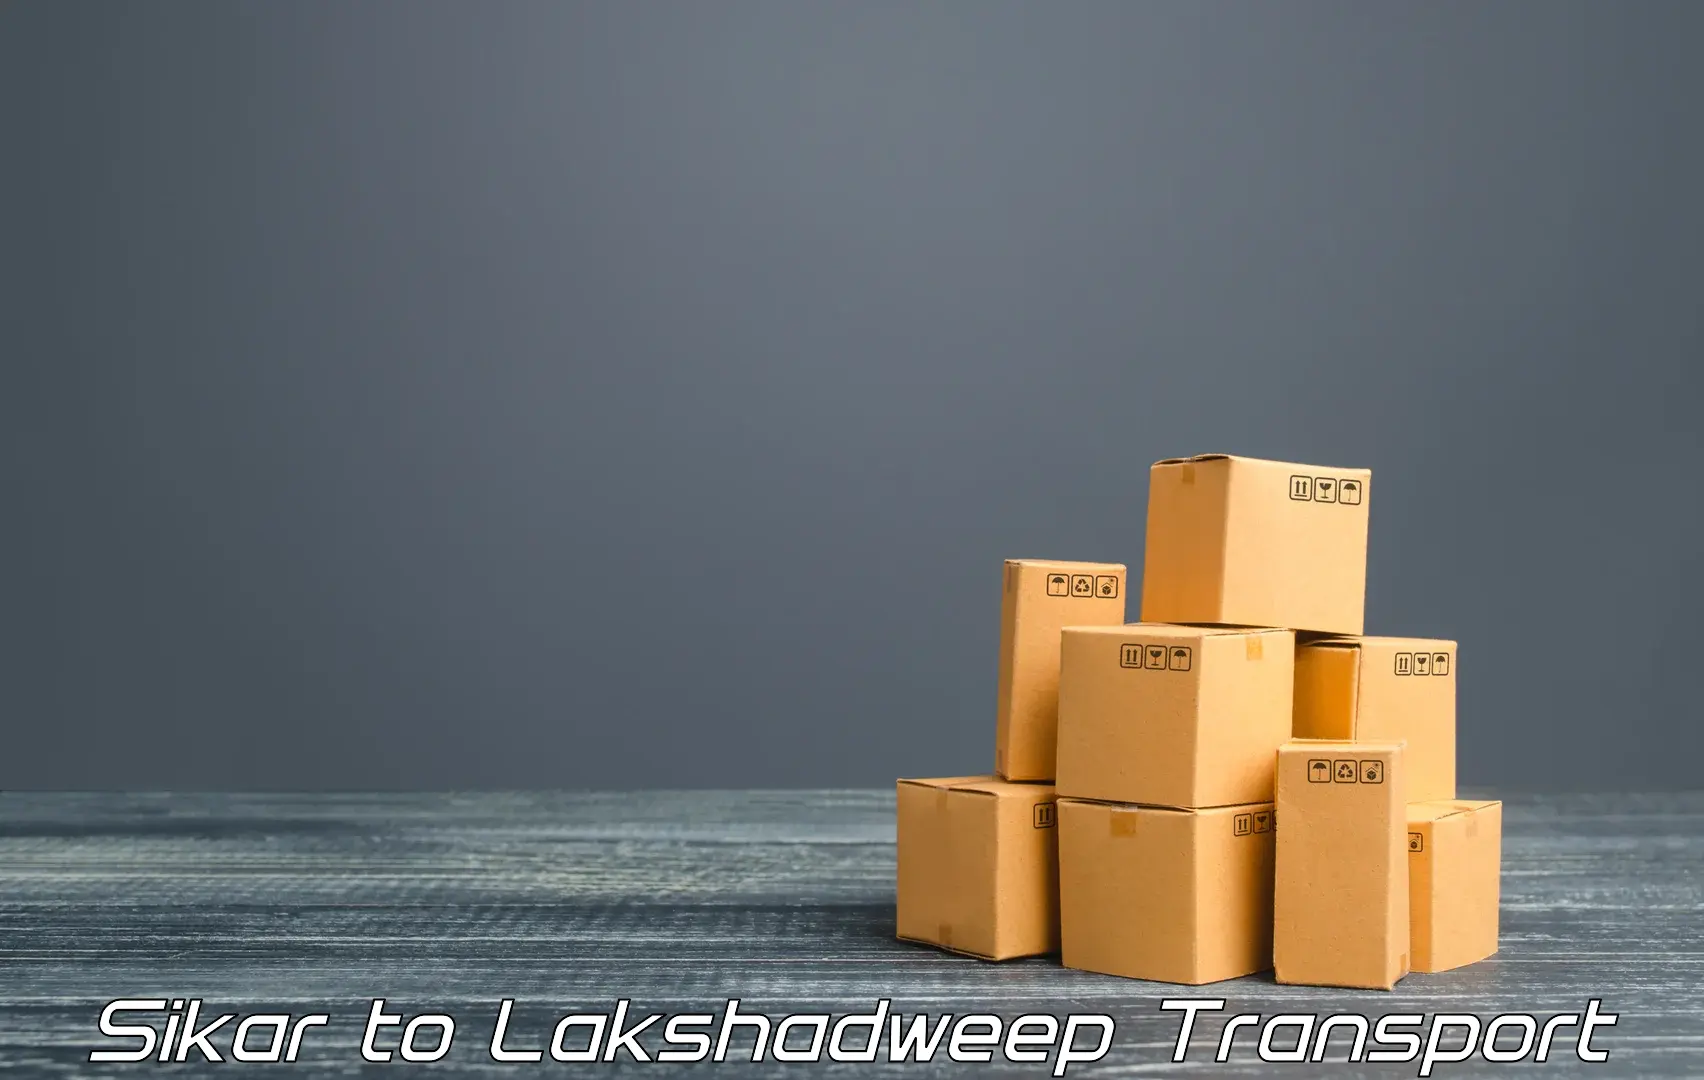 Container transport service Sikar to Lakshadweep